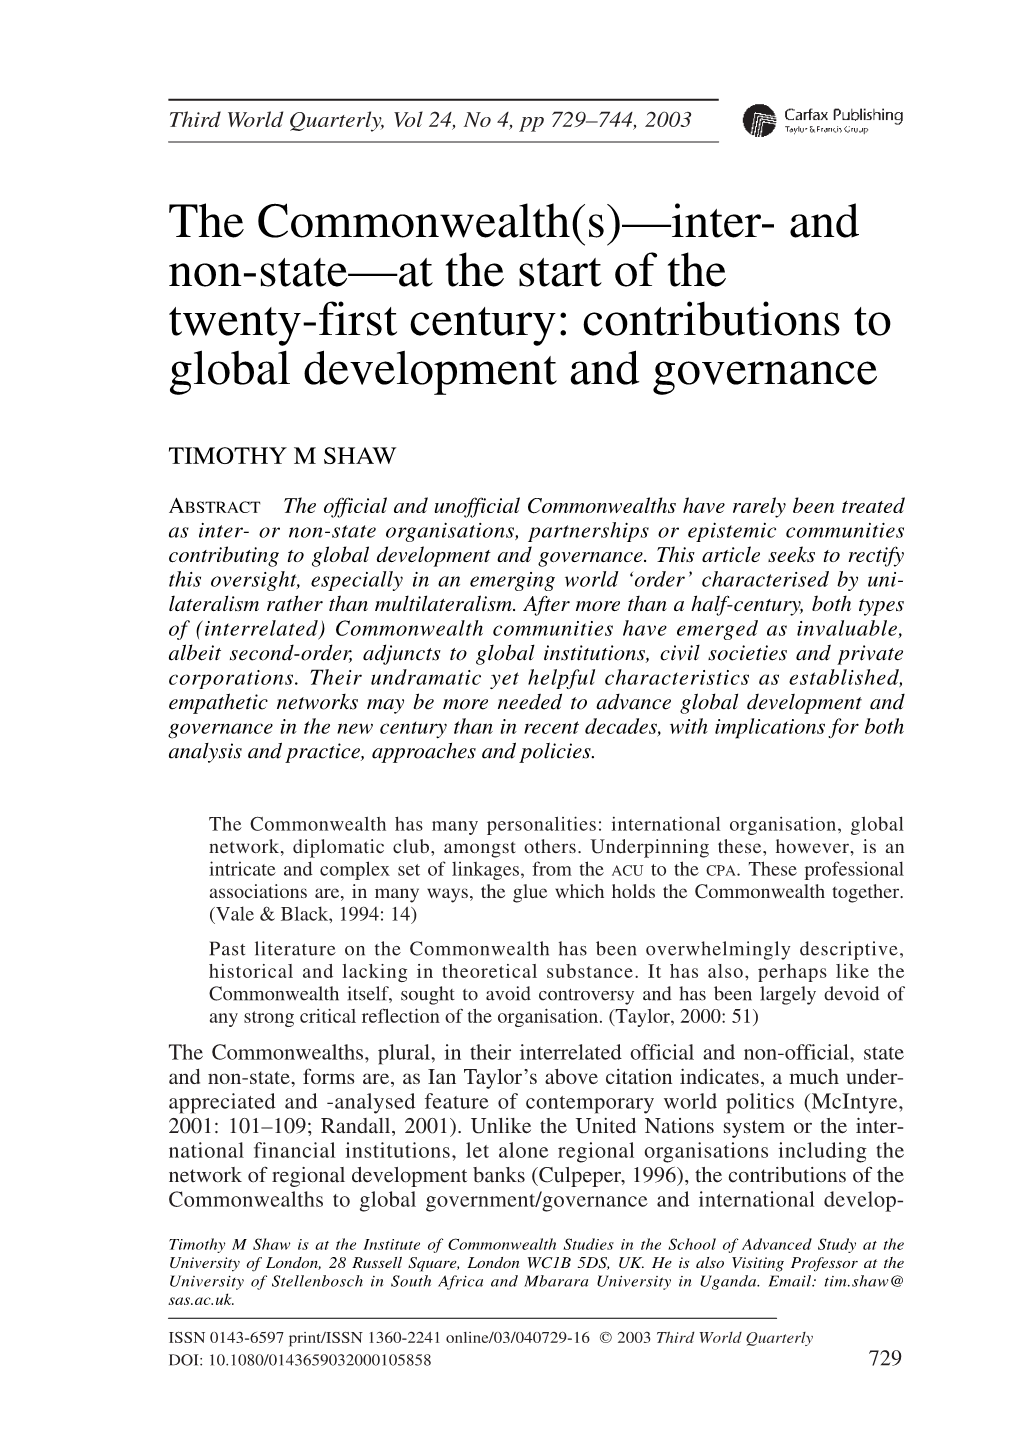 The Commonwealth(S)—Inter- and Non-State—At the Start of the Twenty-First Century: Contributions to Global Development and Governance